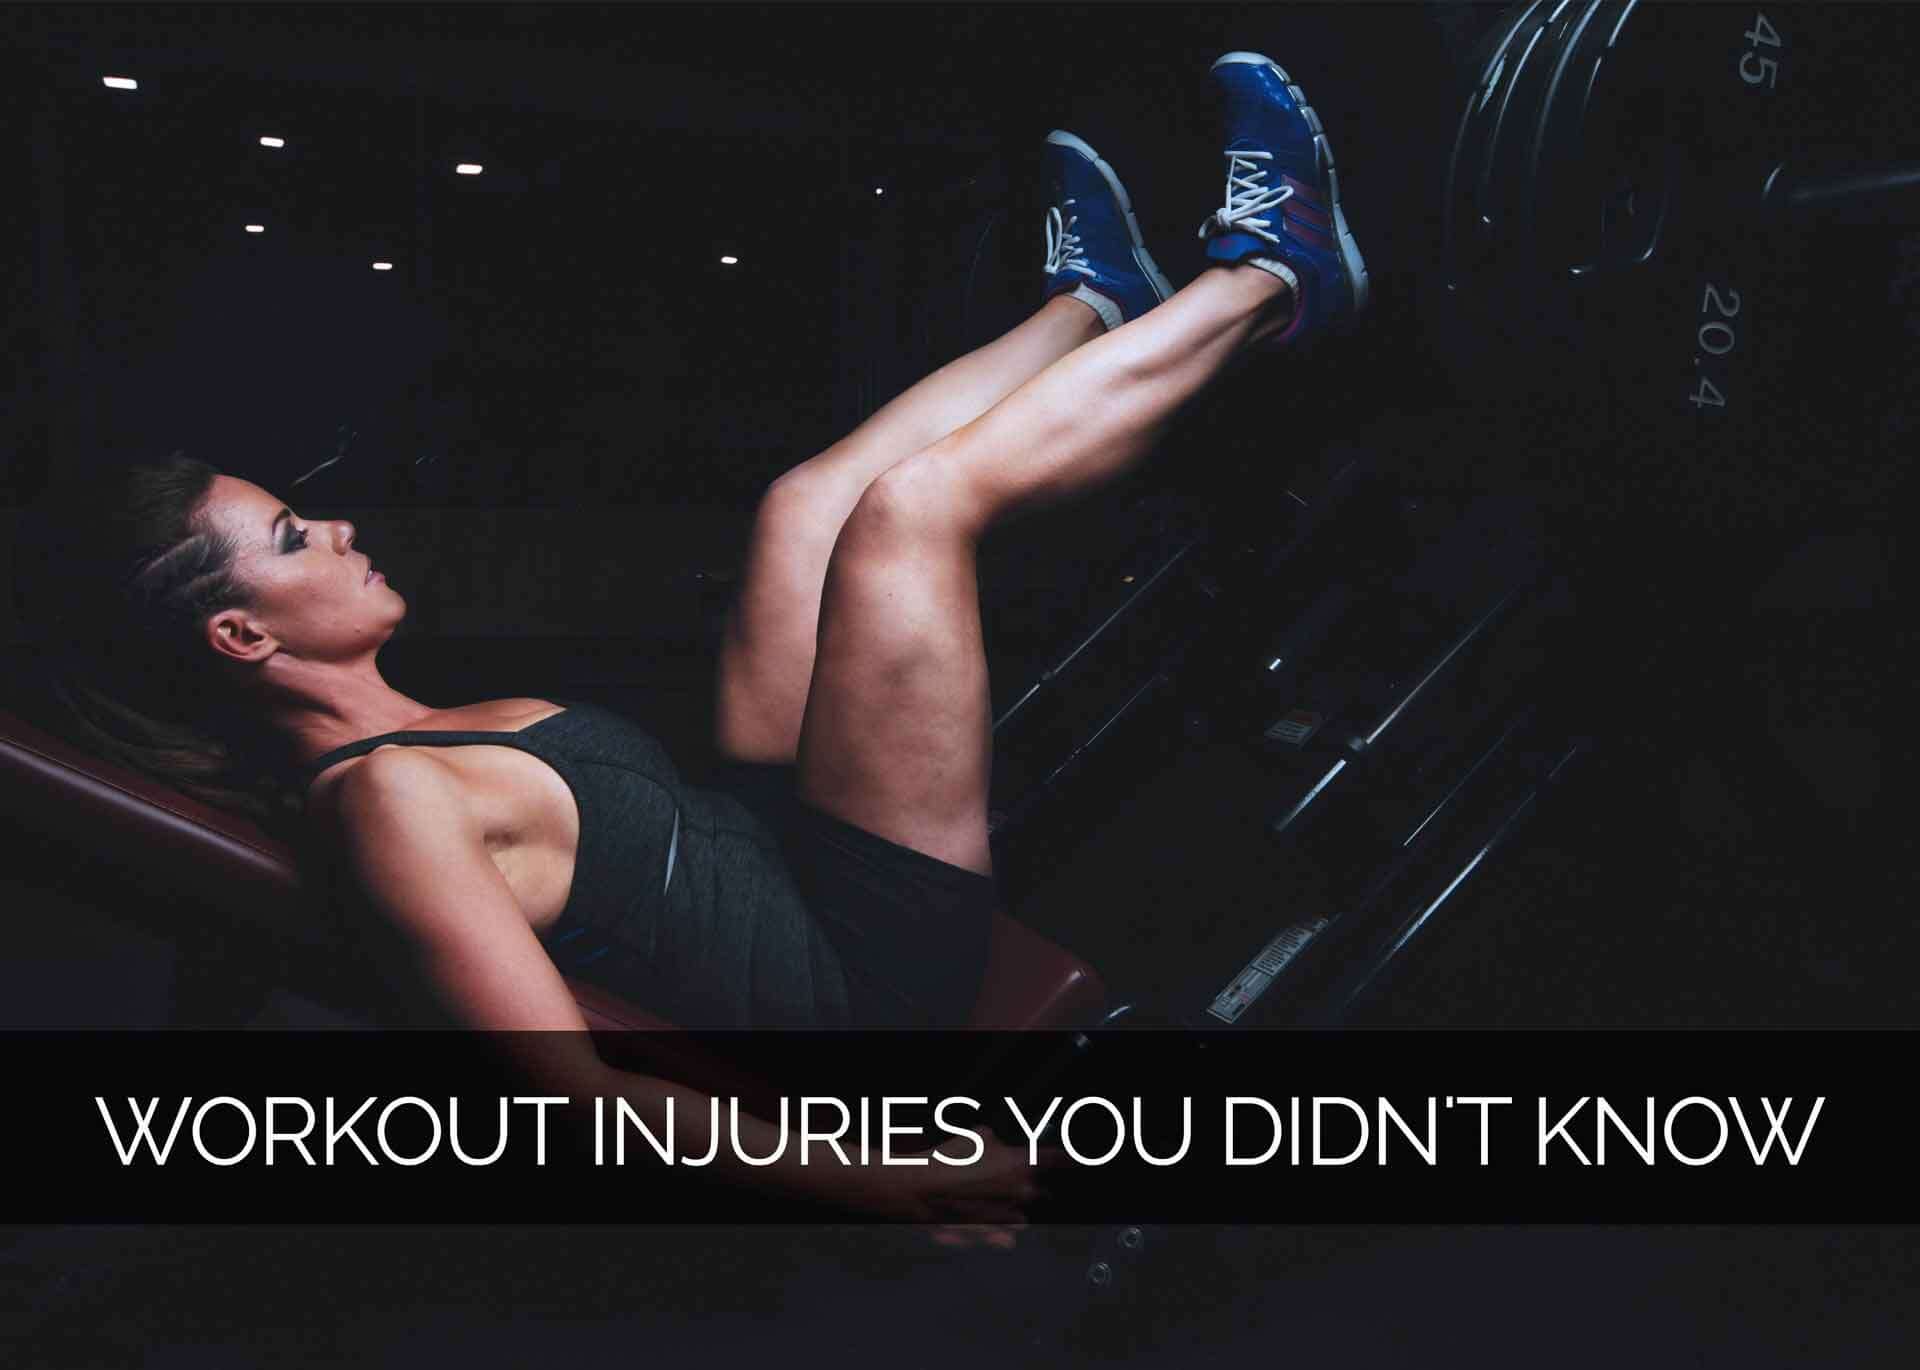 Workout Injuries you didn’t know.